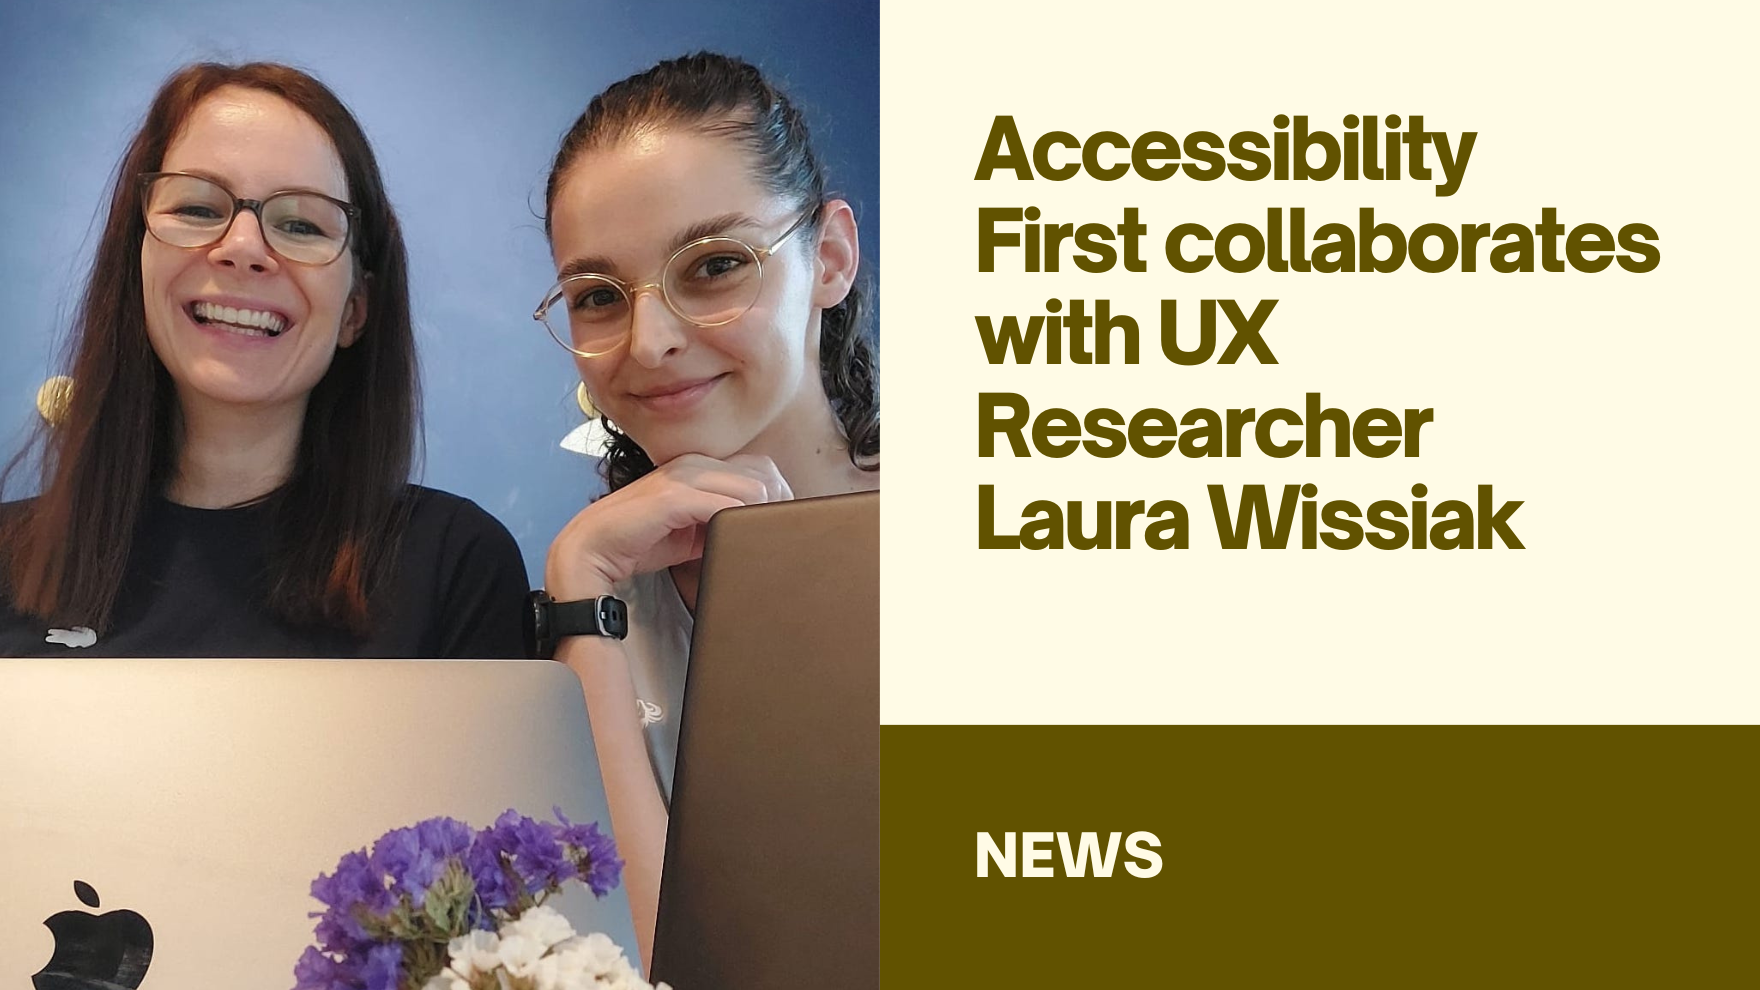 Cover Image for Accessibility First collaborates with UX Researcher Laura Wissiak